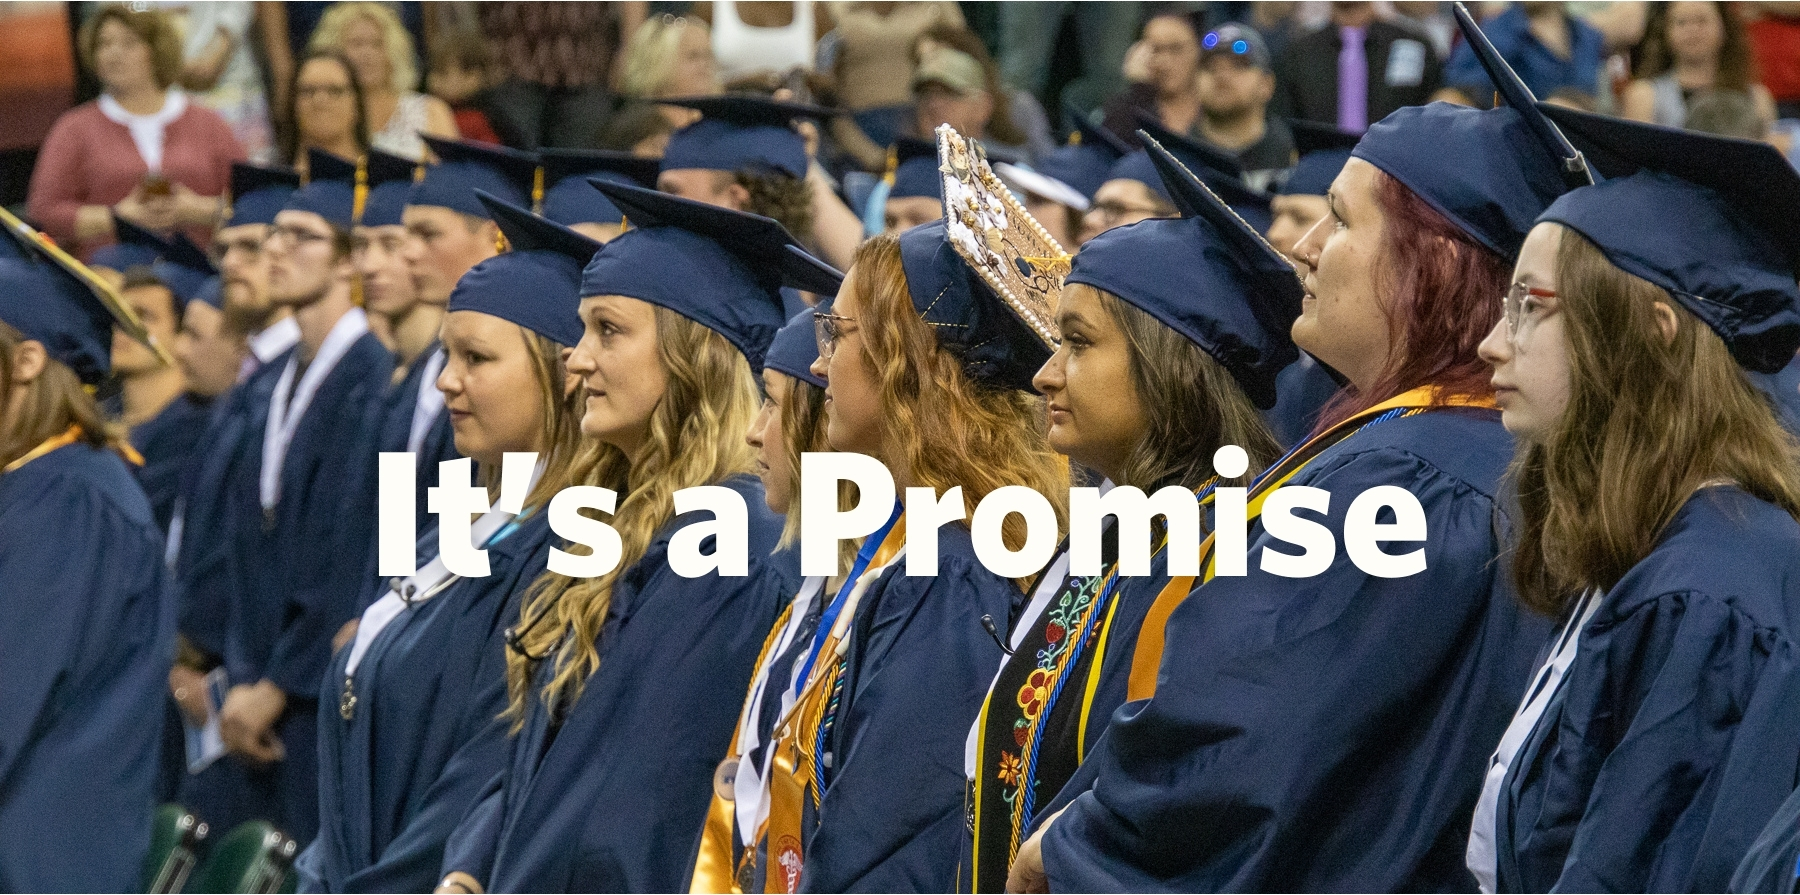 Northwest Technical College students during graduation with an overlay of "It's a Promise" text